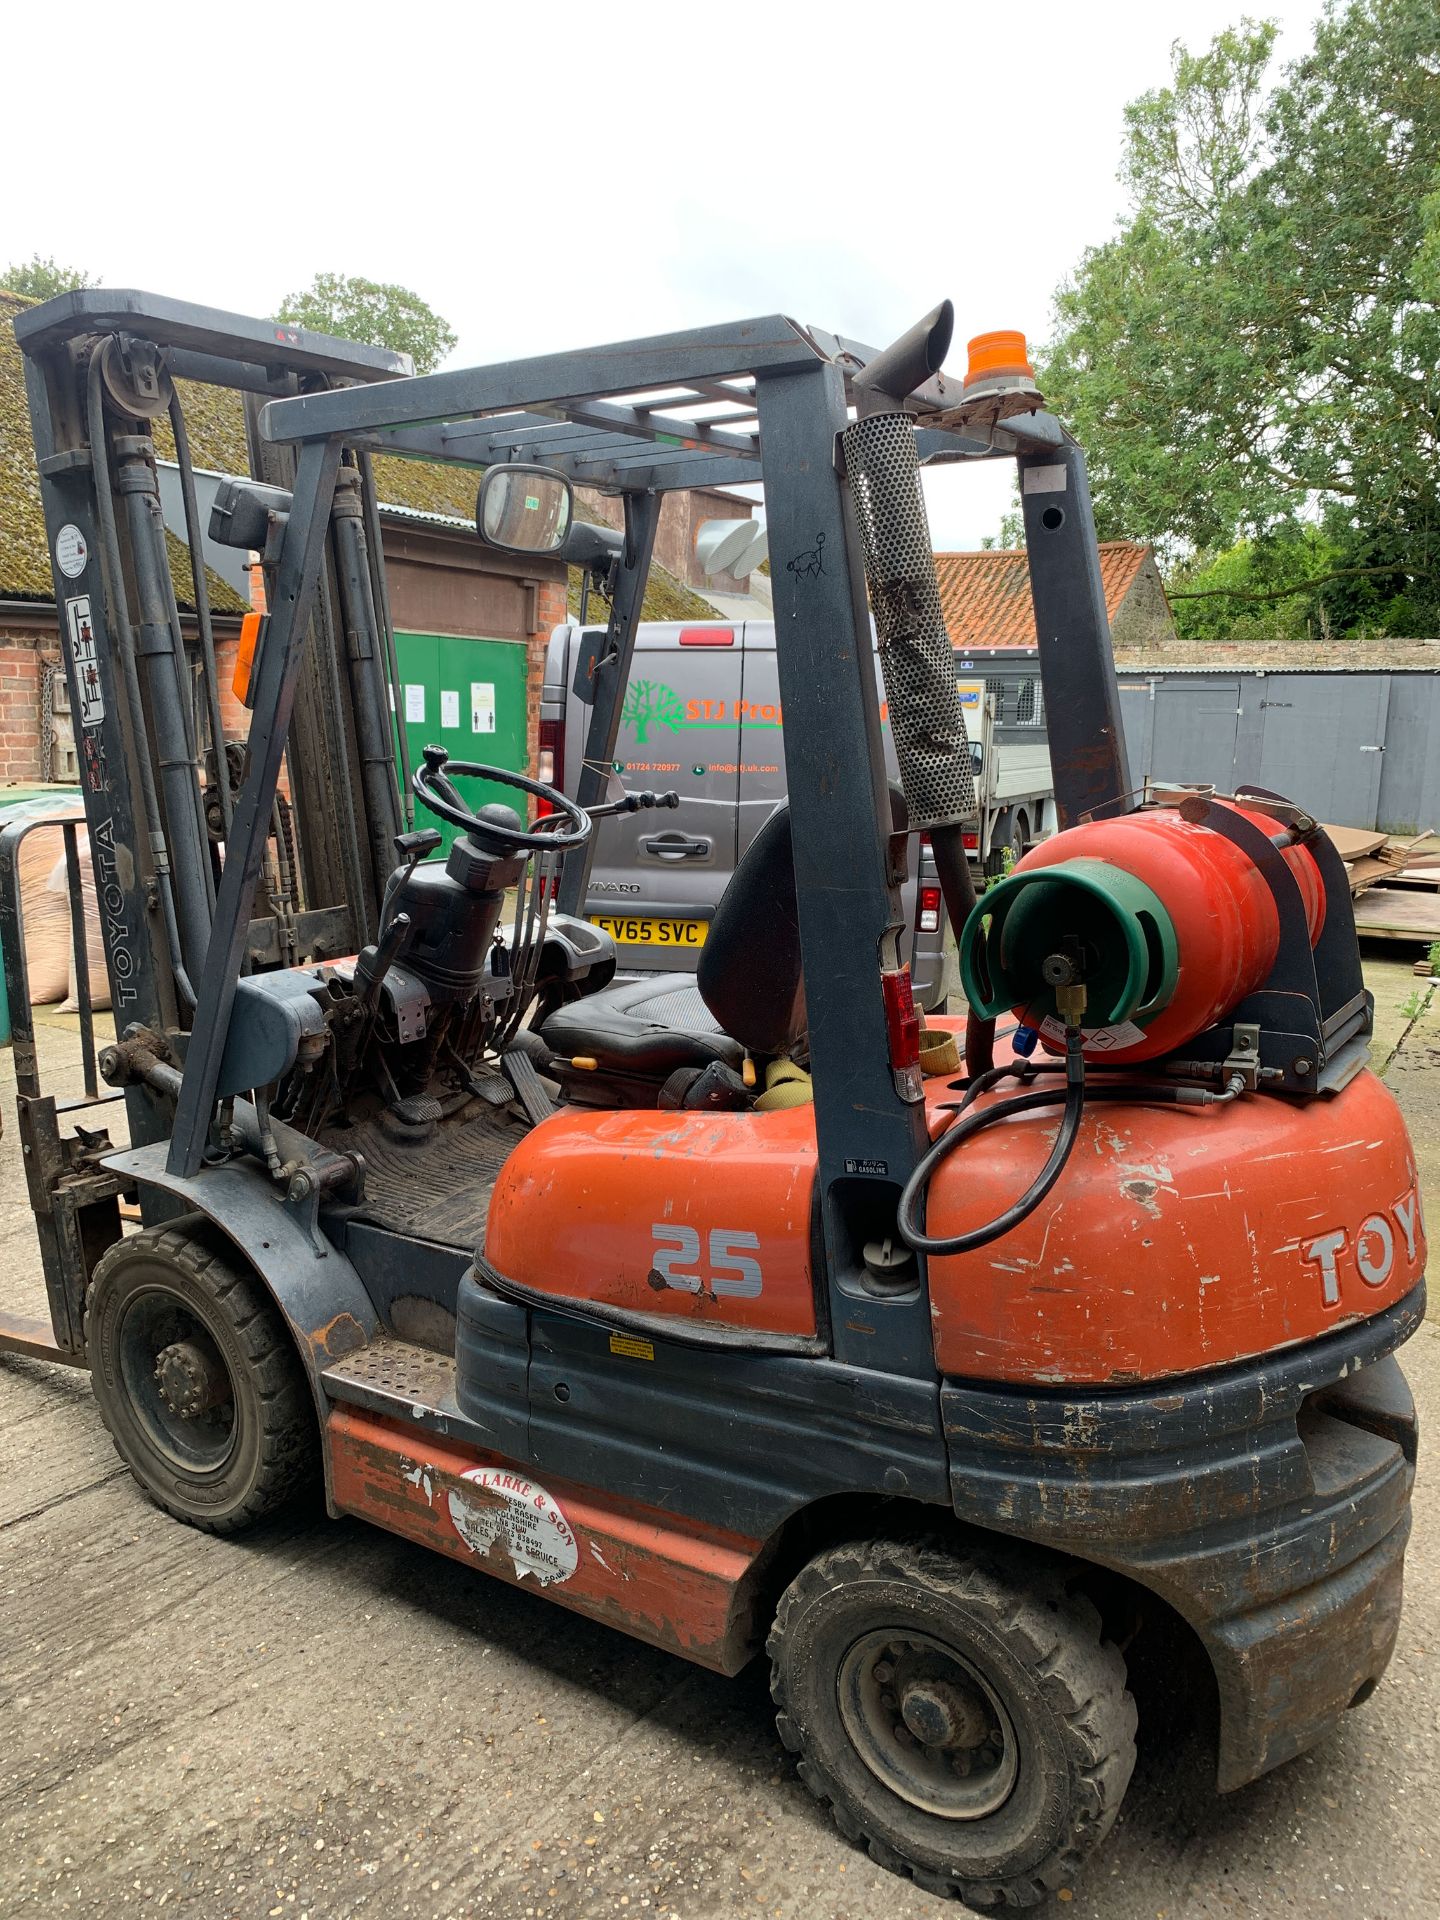 Toyota 25 Duplex Mast Gas Powered Forklift Truck with Fitted Sideshift Attachment - Image 7 of 14